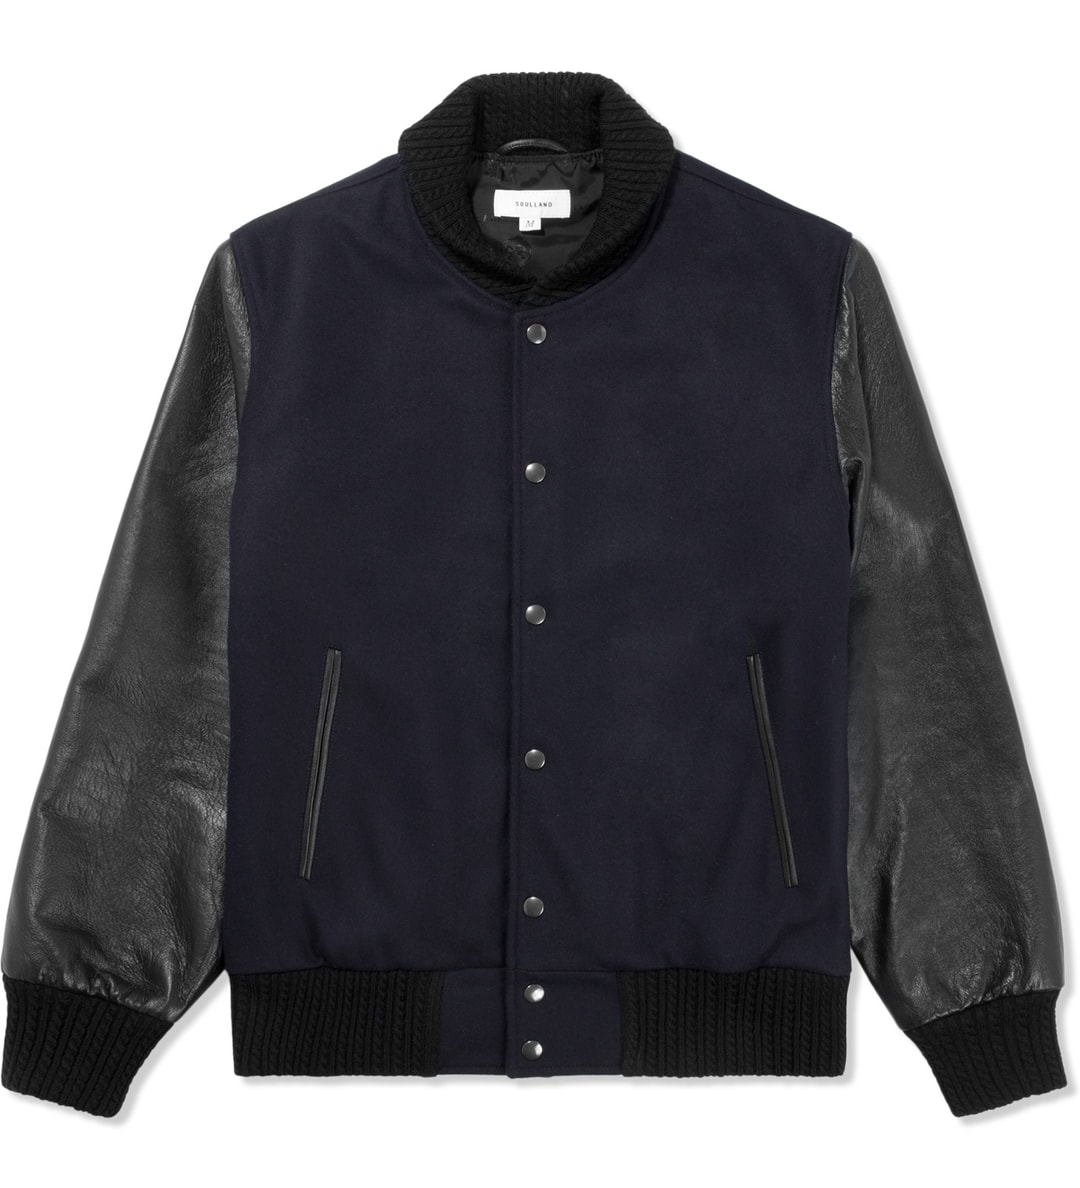 Soulland - Navy/Black Dan Varsity Jacket HBX - Globally Curated Fashion and Lifestyle by Hypebeast